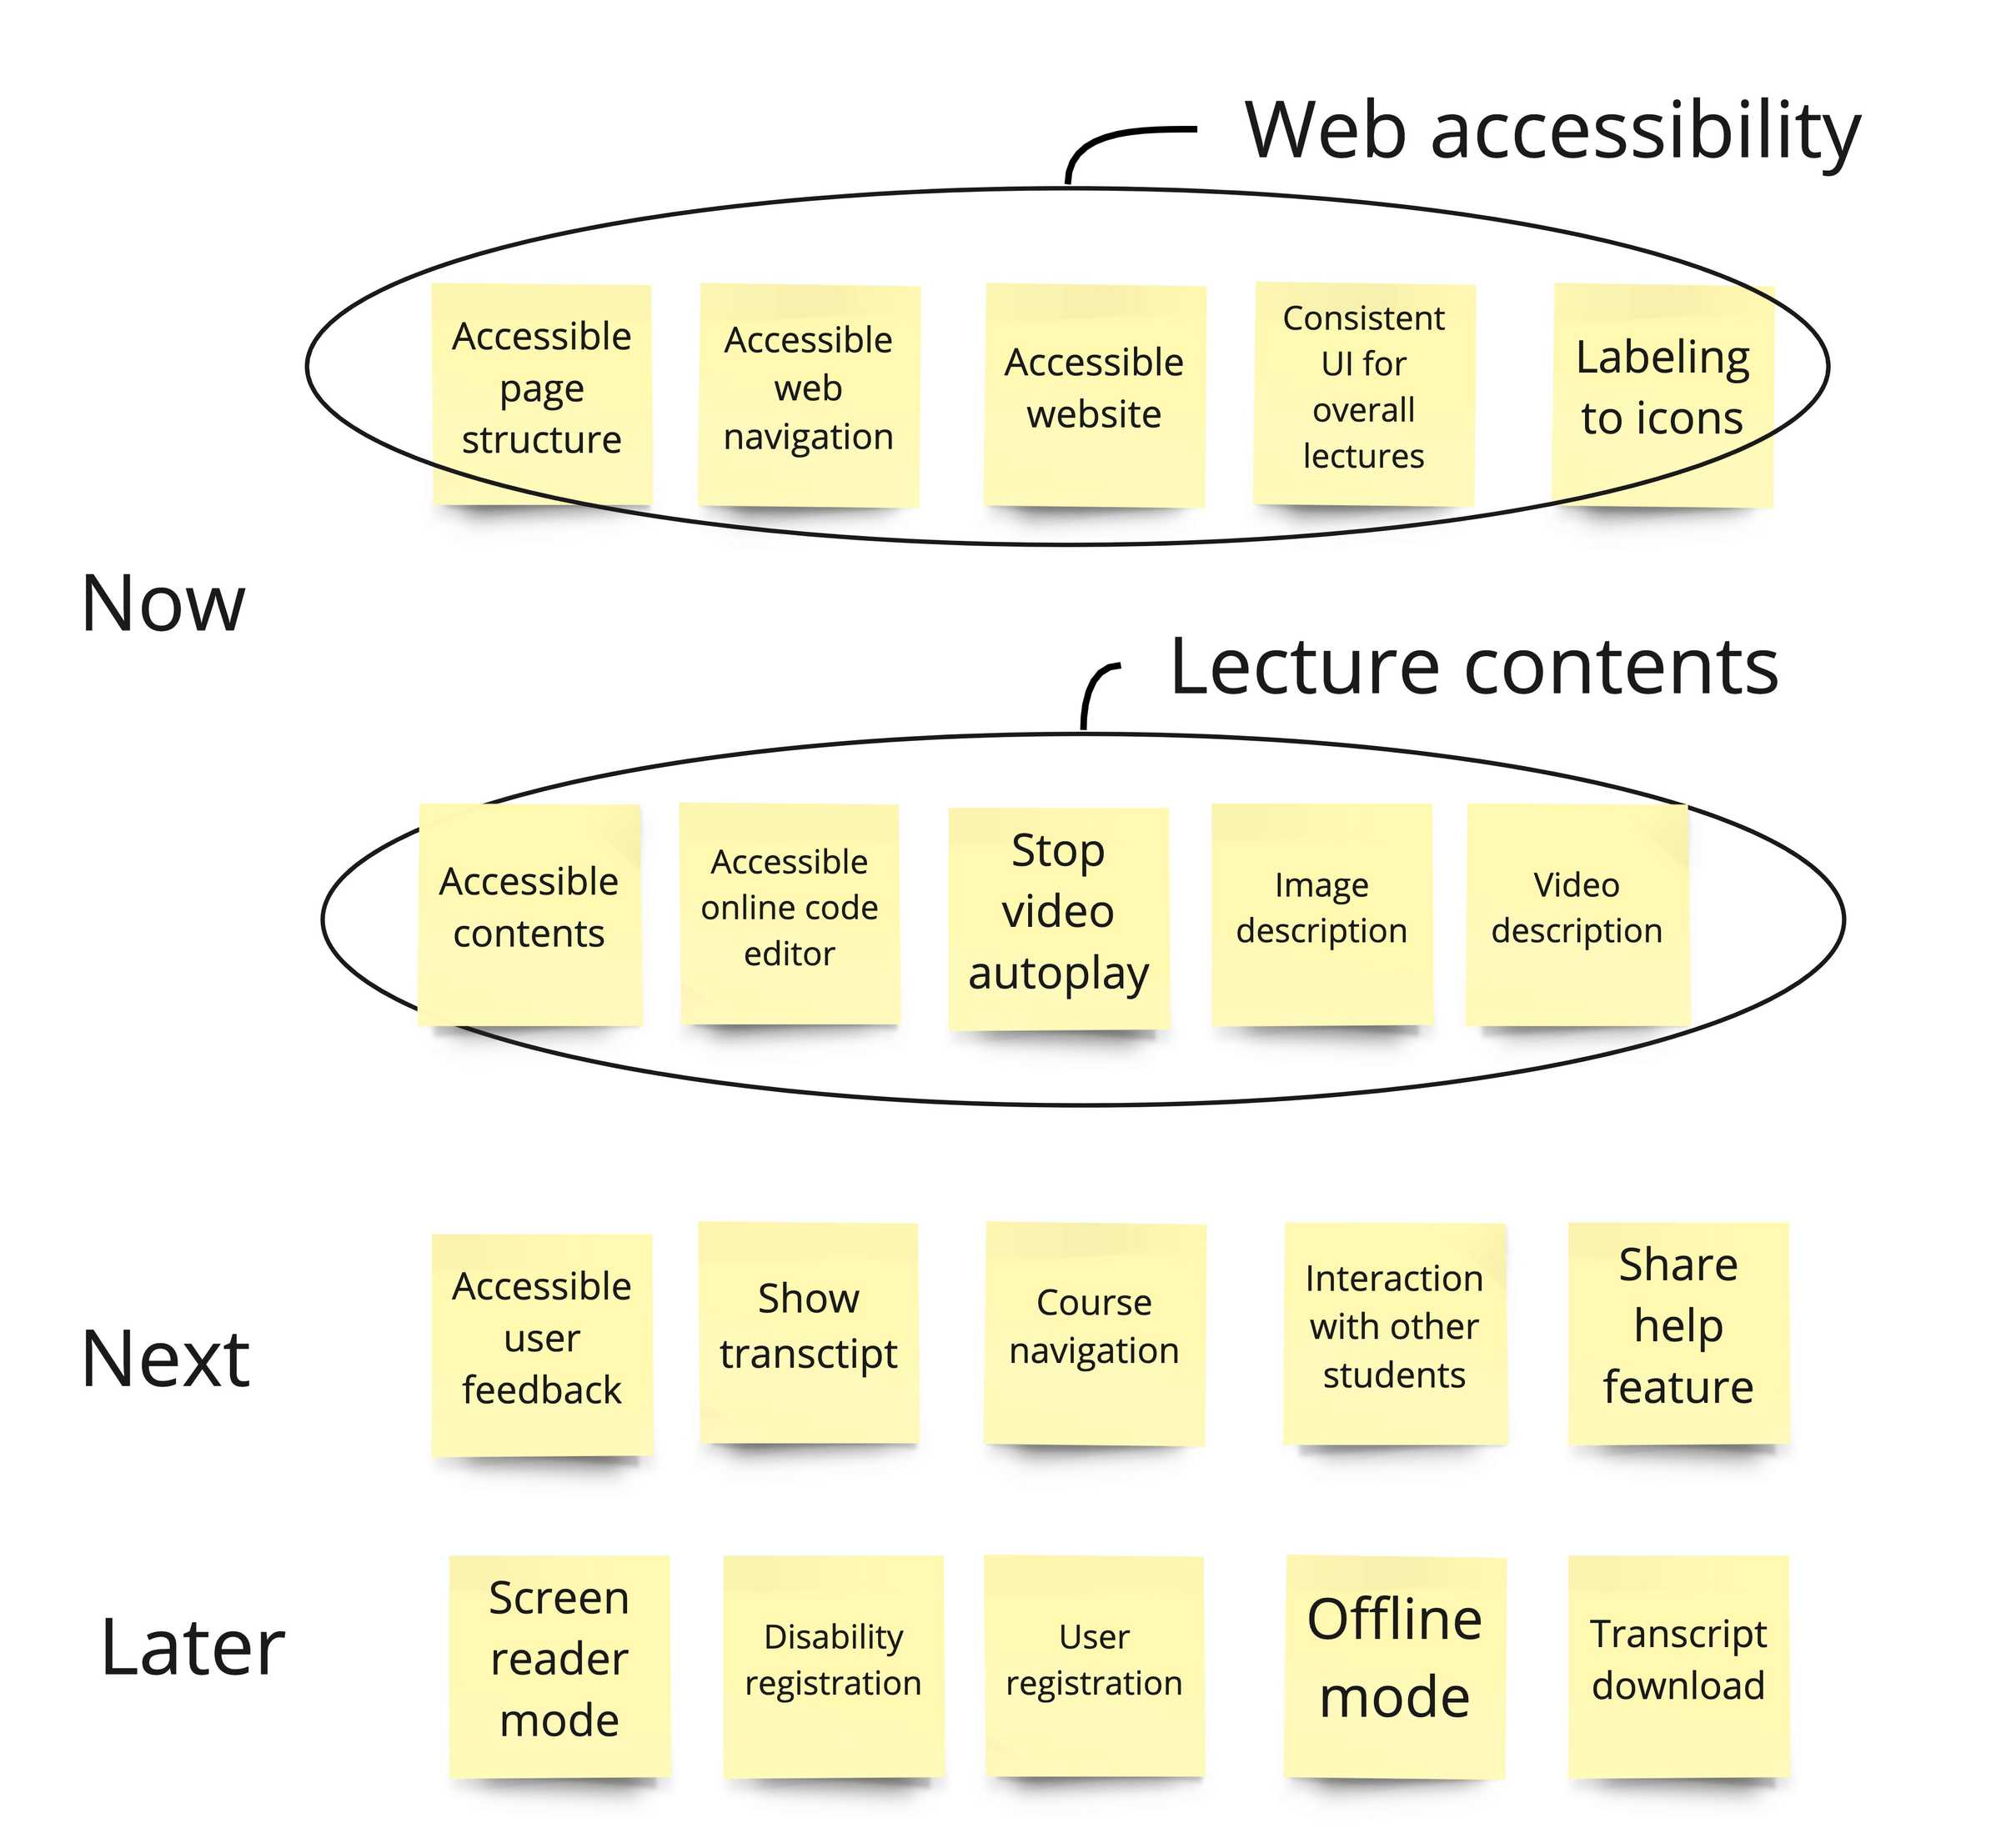 Now section has two groups: web accessibility and lecture contents. Web accessibility has five items: accessible page structure, accessible web navigation, accessible website, consistent UI for overall lectures, and labeling to icons. Lecture contens has five items: accessible contents, accessible online code editor, stop video autoplay, image description, and video description. Next sectino has five items: accessible user feedback, show transcript, course navigation, interaction with other students, share help feature. Later sectino has five items: screen reader mode, disability registration, user registration, offline mode, transcript download.